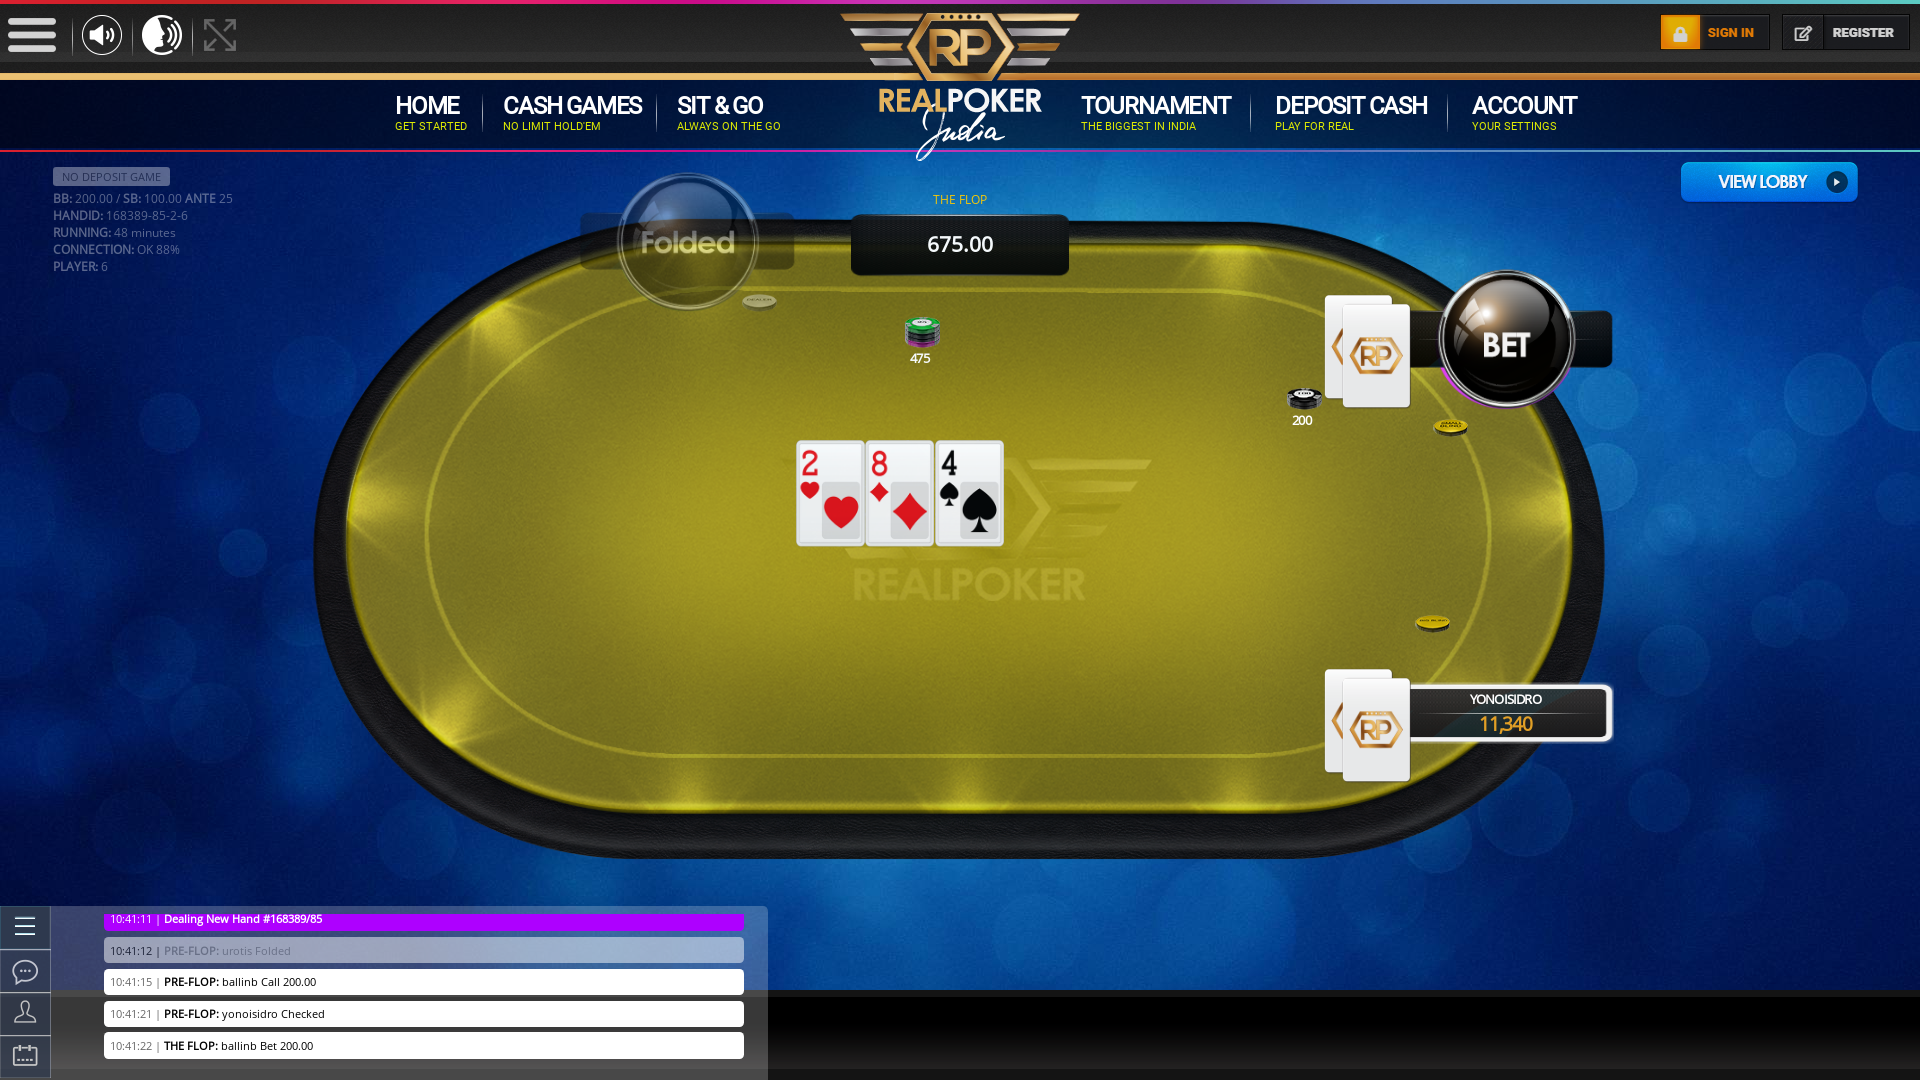 Indian poker on a 10 player table in the 48th minute